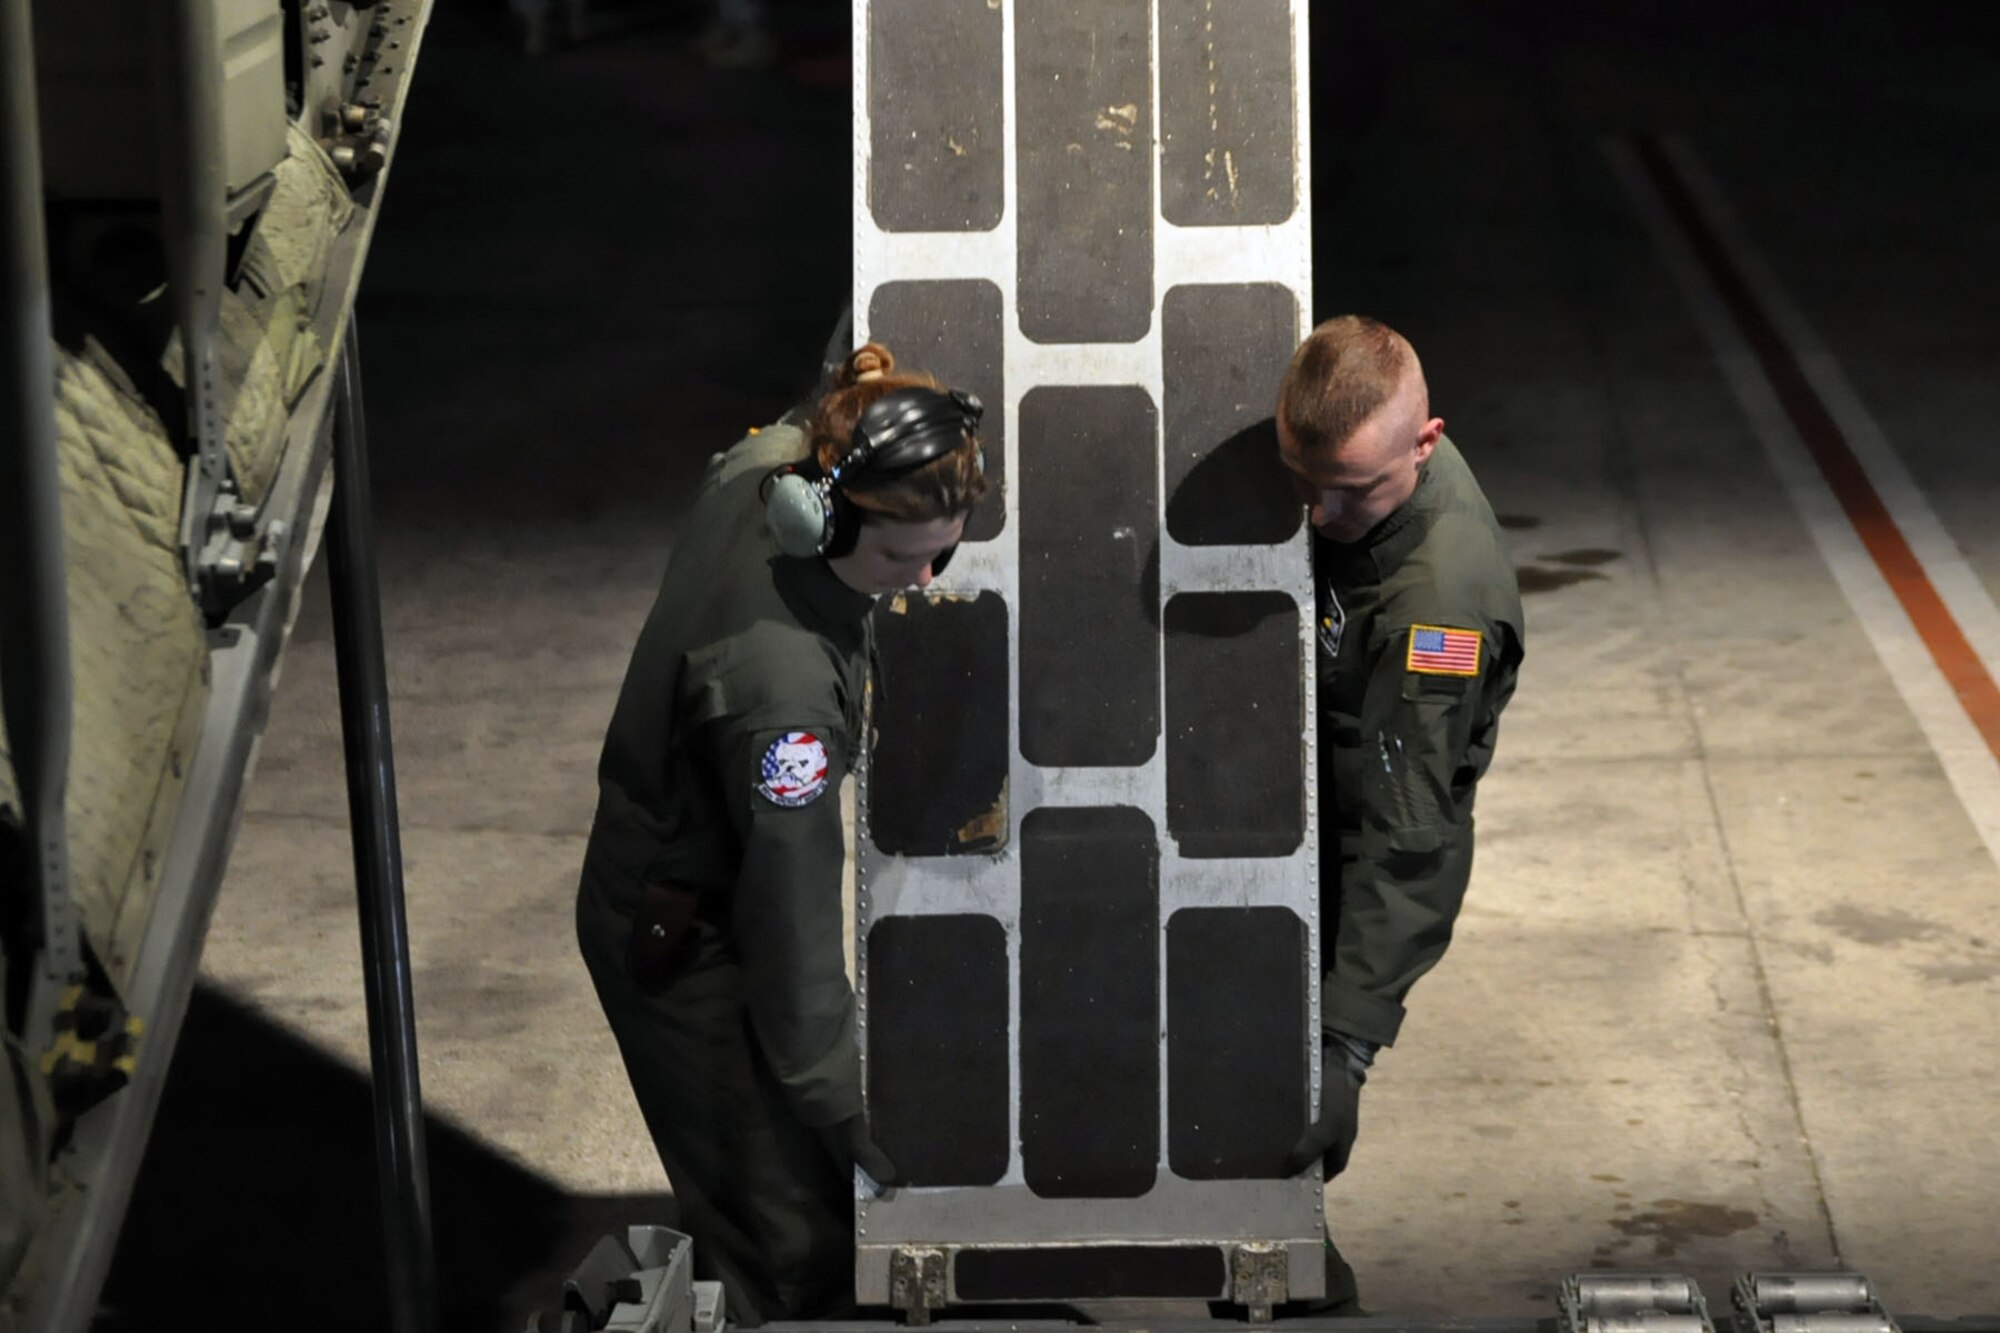 PORT-AU-PRINCE INTERNATIONAL AIRPORT, Haiti -- Air Force Reserve Senior Airman Jessica Strumbly, a crew chief with the 910th Aircraft Maintenance Squadron, and Staff Sgt. Michael Culp, a loadmaster with the 773rd Airlift Squadron, remove a loading ramp from the rear cargo platform of a C-130H Hercules tactical cargo transport aircraft on the tarmac, here, January 18. The Citizen Airmen are part of a 12-person crew assigned to the 910th Airlift Wing, based out of Youngstown Air Reserve Station, Ohio, that just delivered a group of U.S. Military medical personnel and supplies as part of the relief effort to the Haitian people in the aftermath of the massive earthquake that devastated Port-au-Prince and the surrounding areas last week. The medical personnel, consisting of U.S. Army and Air Force Servicemembers were flown, by the 910th's C-130, to Haiti from Soto Cano Air Base, Honduras. The 910th currently has three aircraft, crews of more than 30 personnel flying relief effort missions and a myriad of Citizen Airmen working at YARS to provide home station support to the crews. The 910th Airlift Wing stands ready to provide airlift capabilities to the massive humanitarian effort as long as needed by mission requirements.